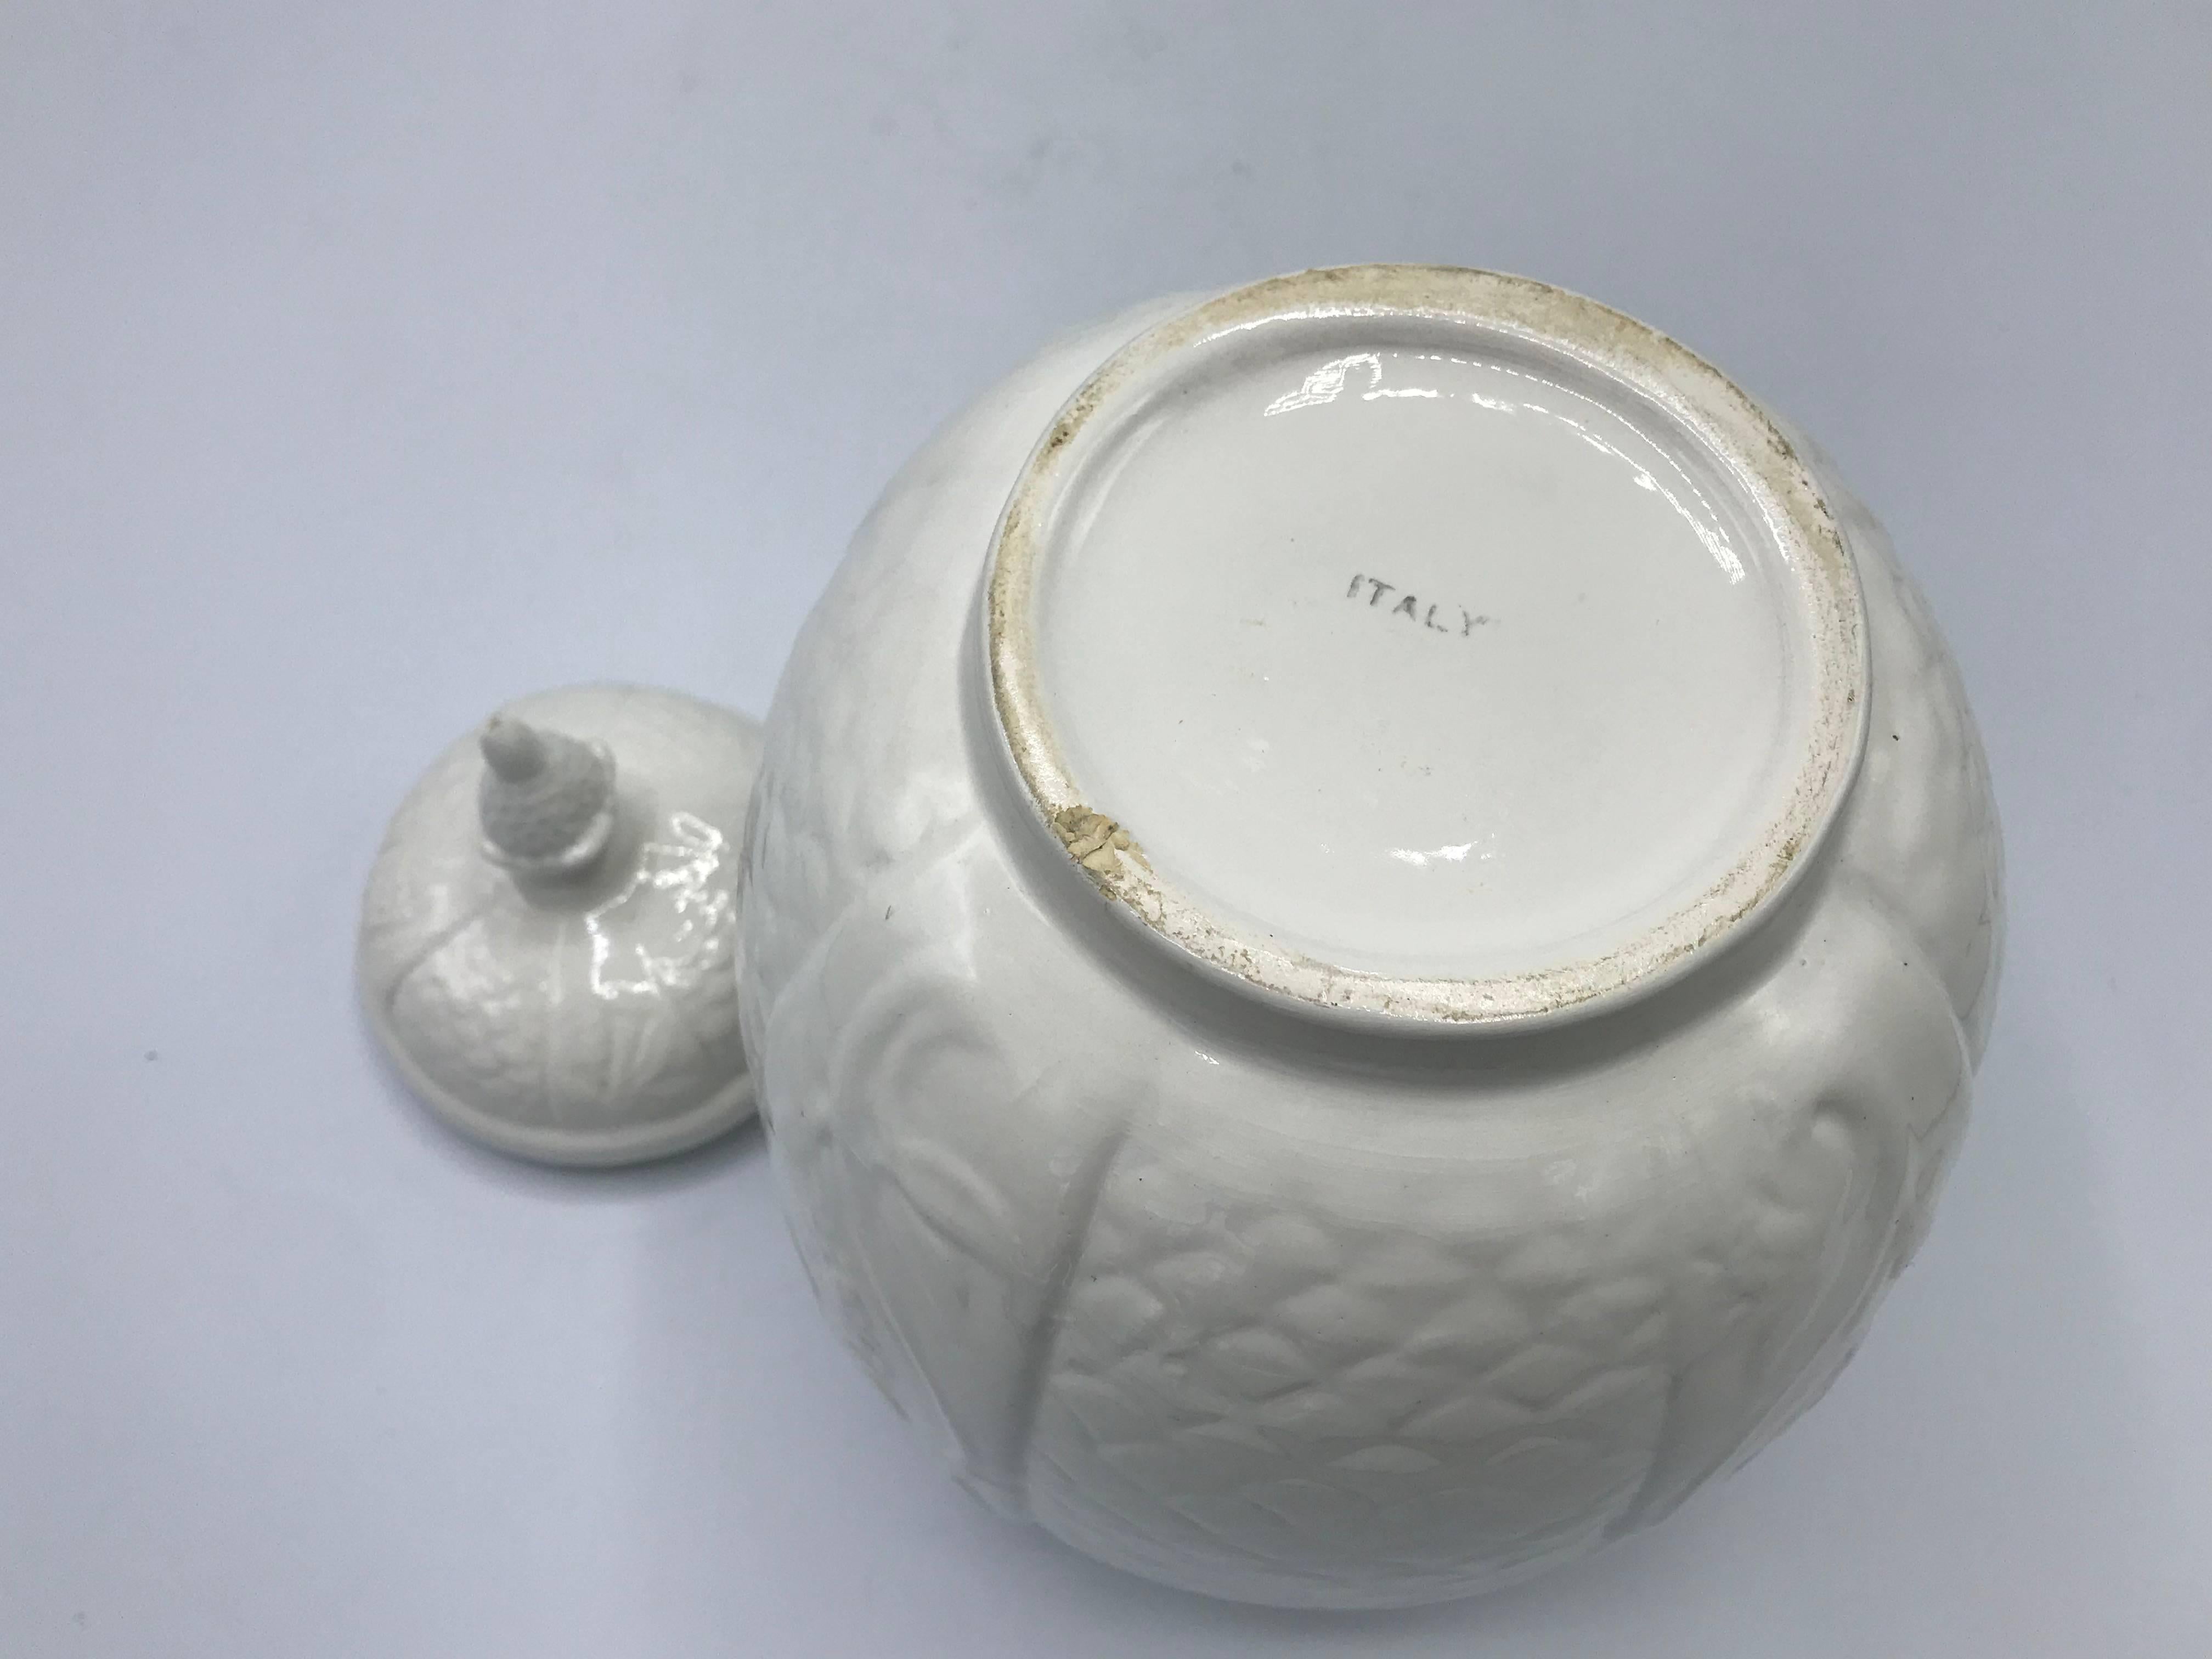 1960s Italian Ceramic Urn Jar with Floral and Pineapple Motif For Sale 1